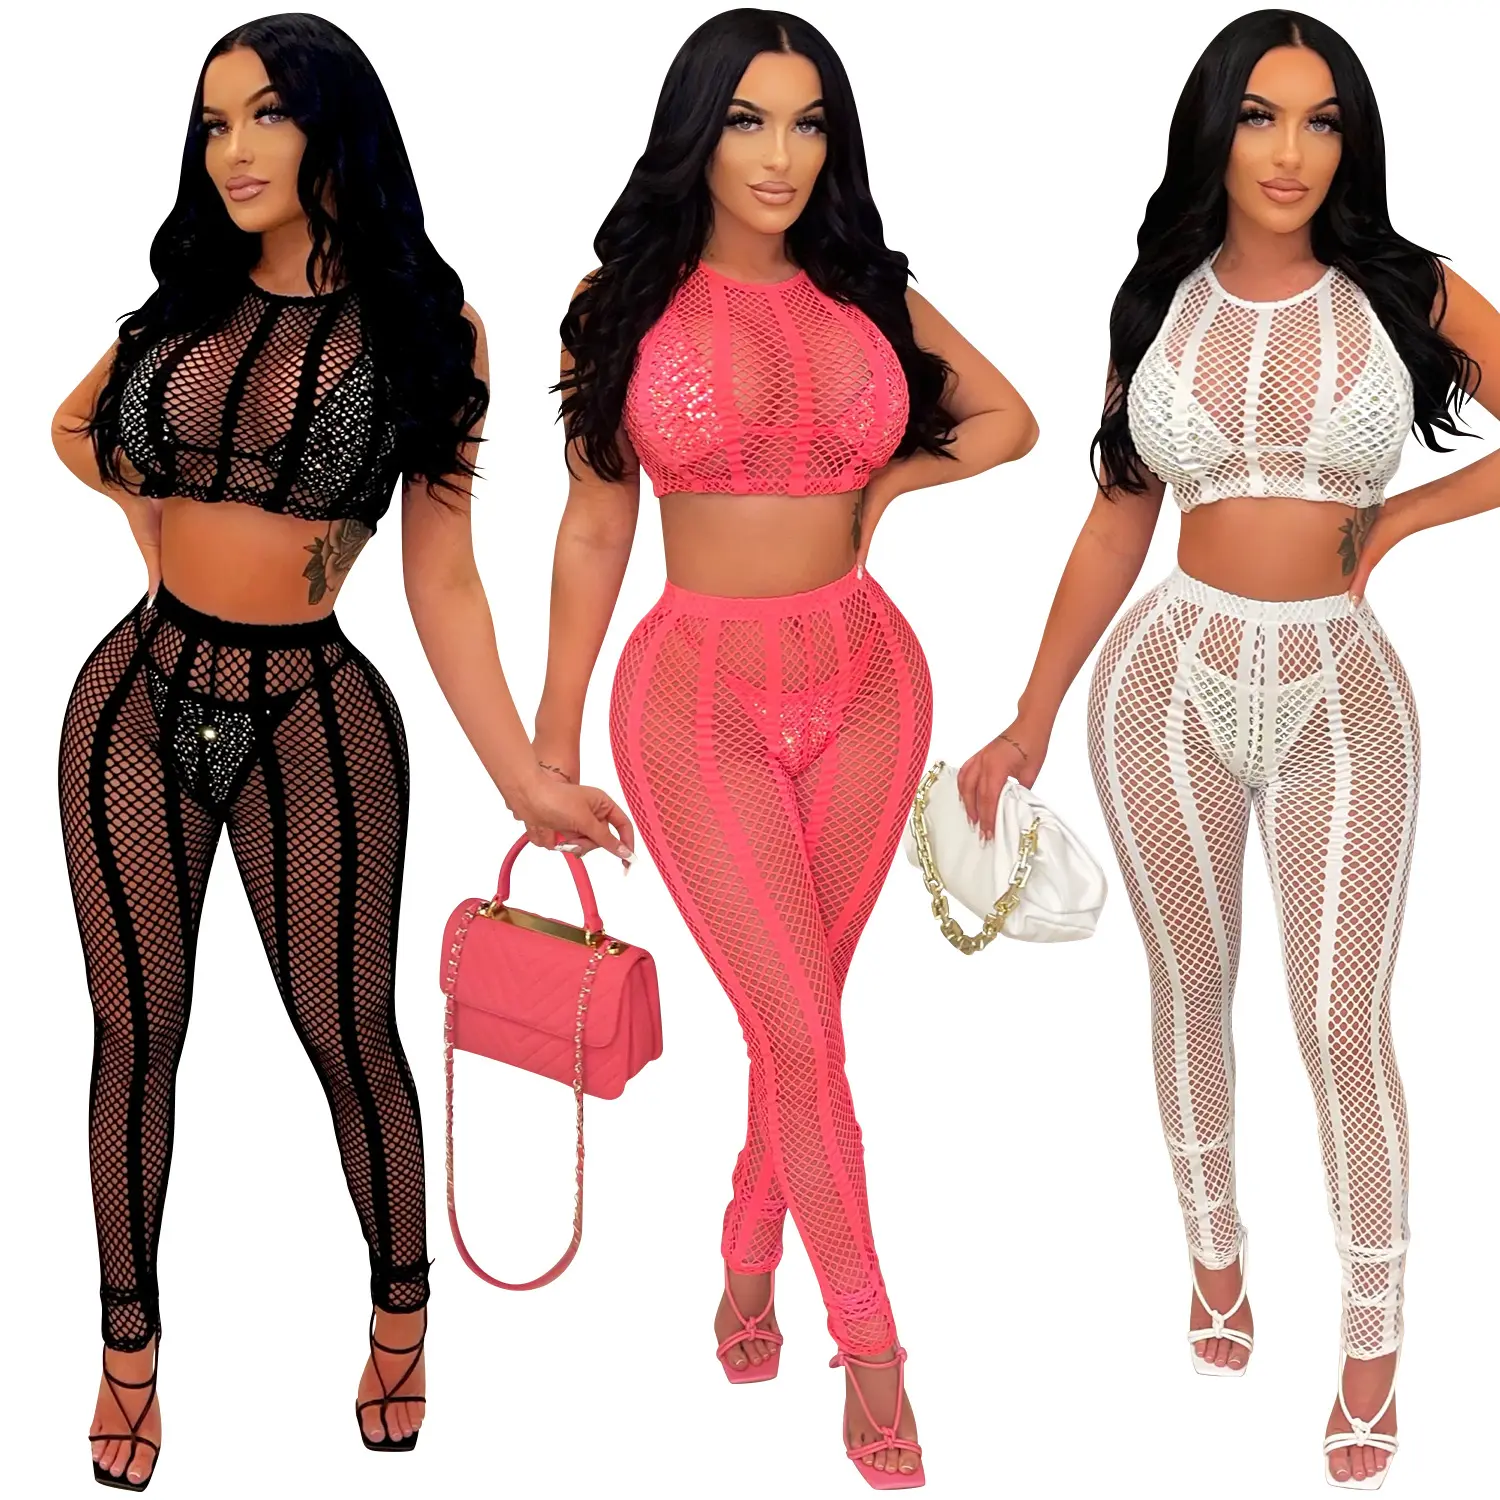 FS6861A Hot Sexy Fishnet Perspective Midnight Party Clothing Women's 4 Piece Sets Matching Outfits